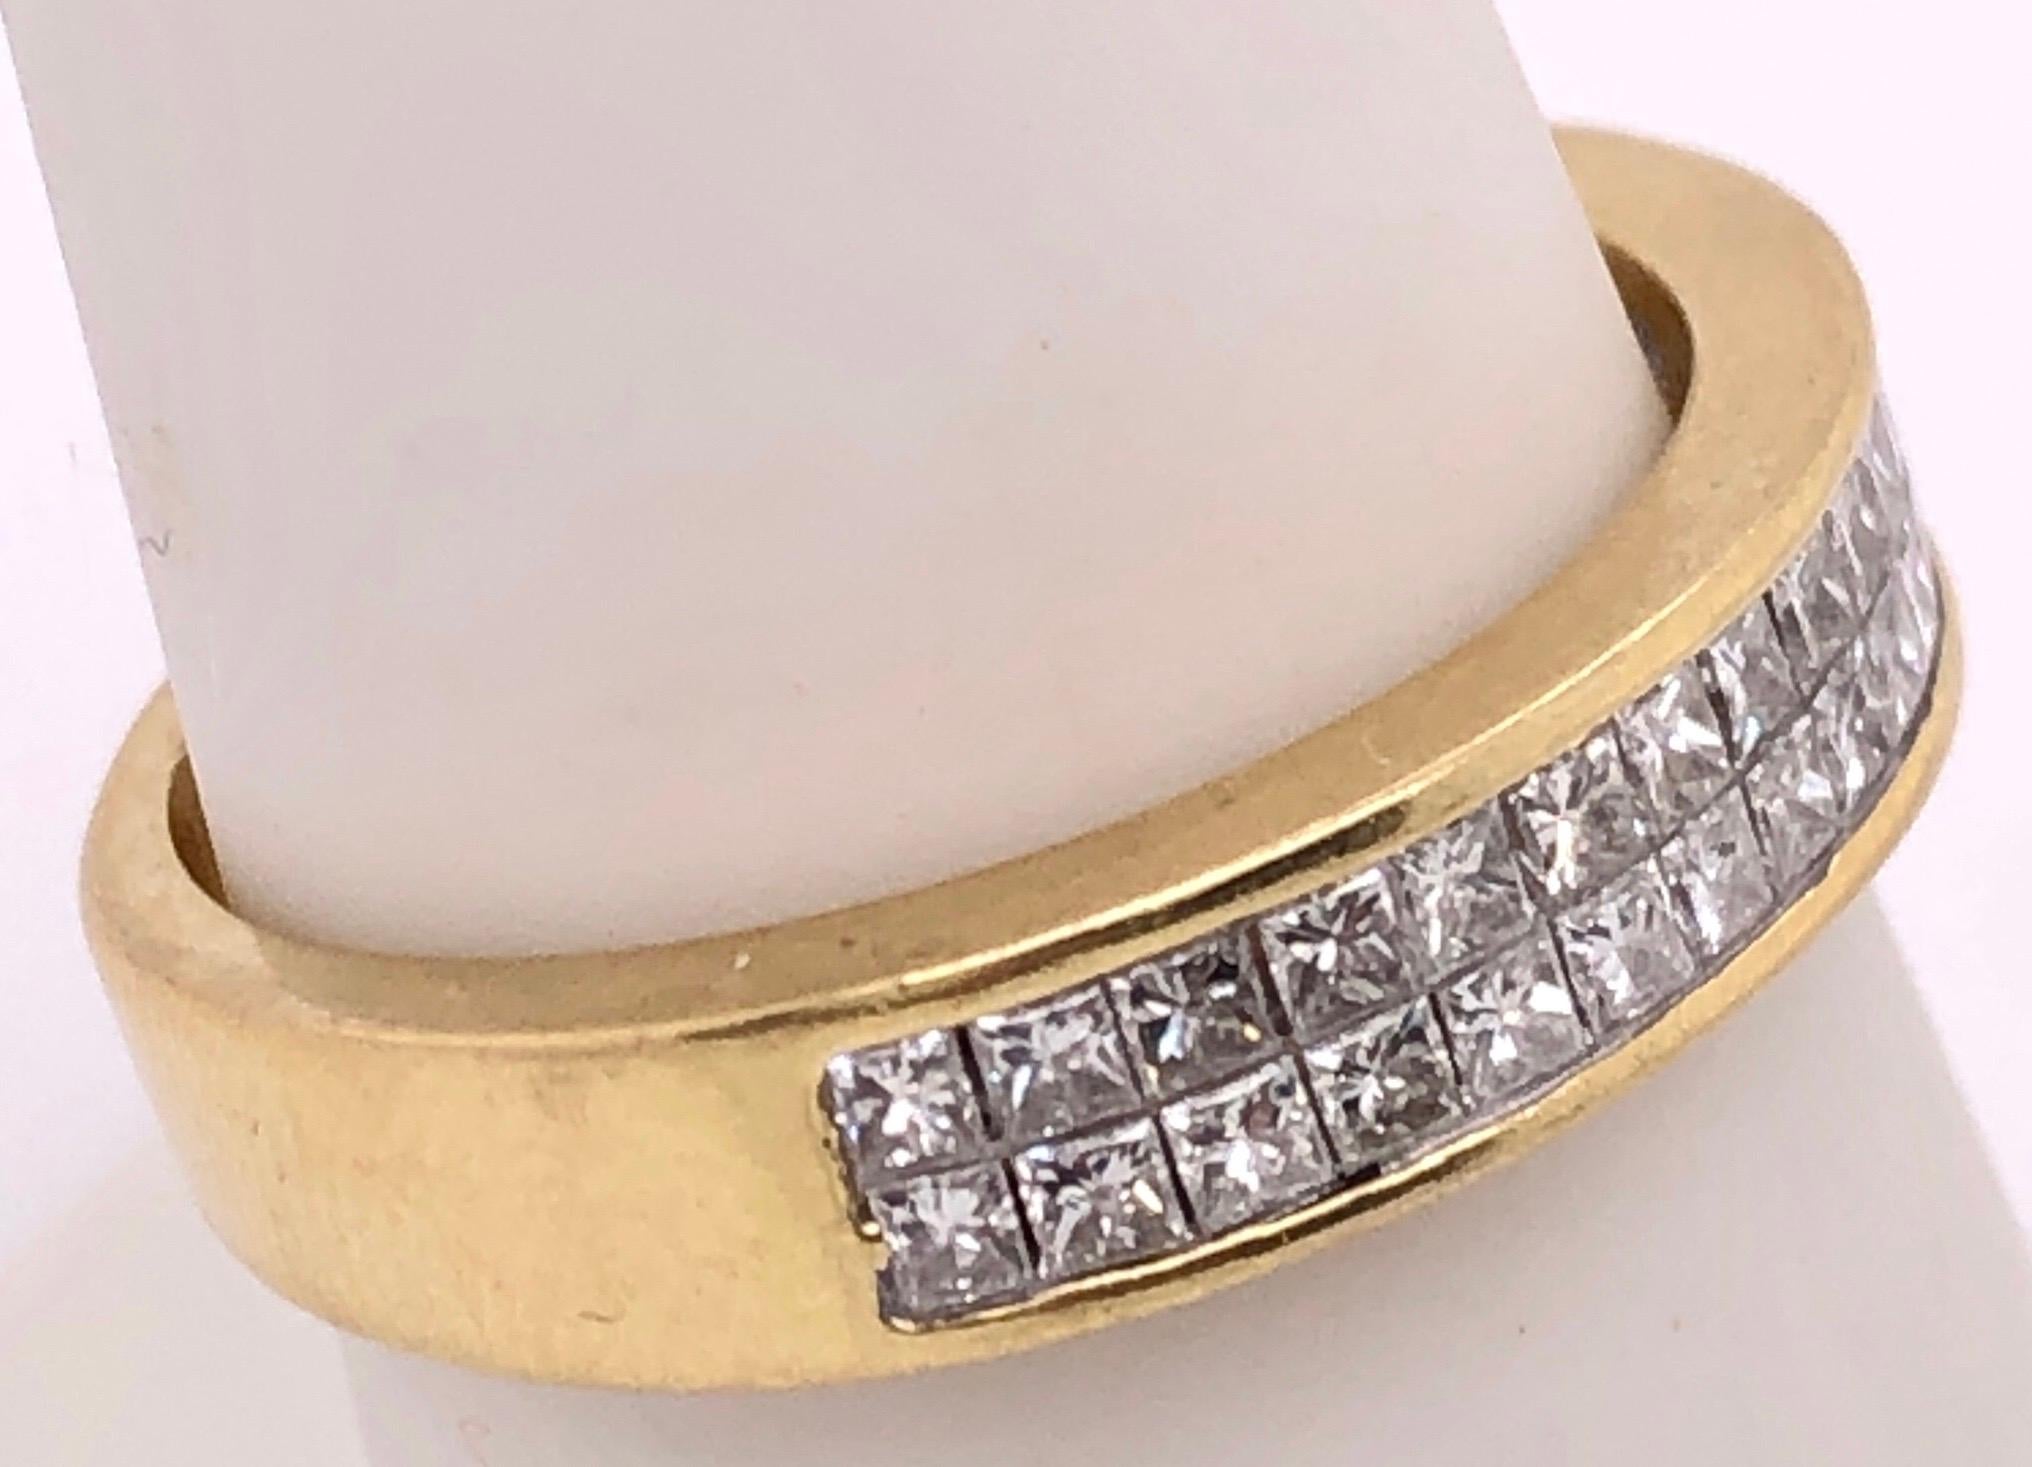 14 Karat Yellow Gold And Double Row Cushion Cut Diamond Ring 
Size 7
4.4 grams total weight.